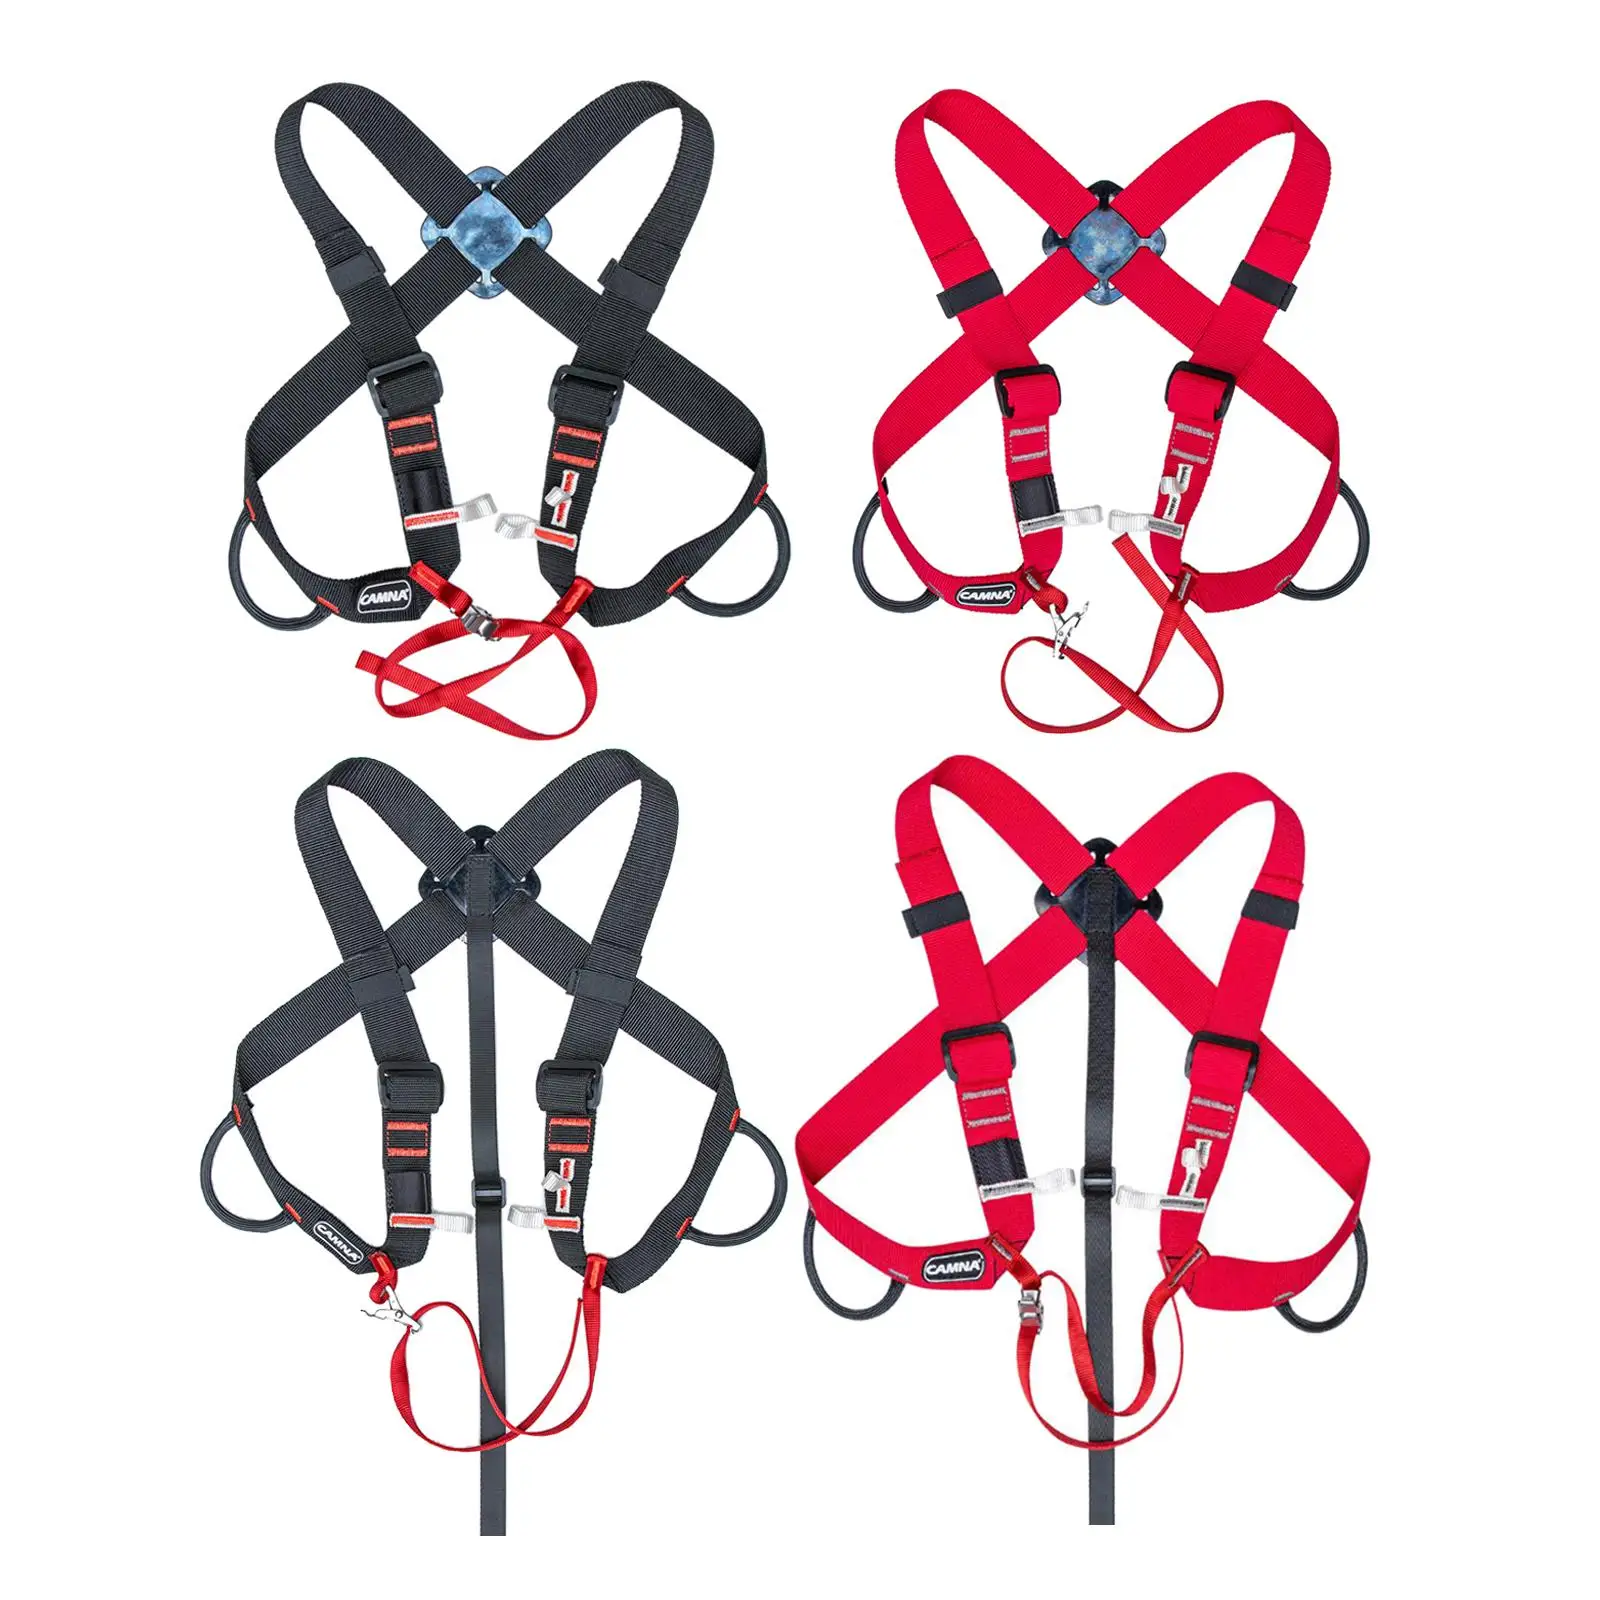 Camping Rock Climb Safety Harness Ascending Decive Fixed Belt for Survival